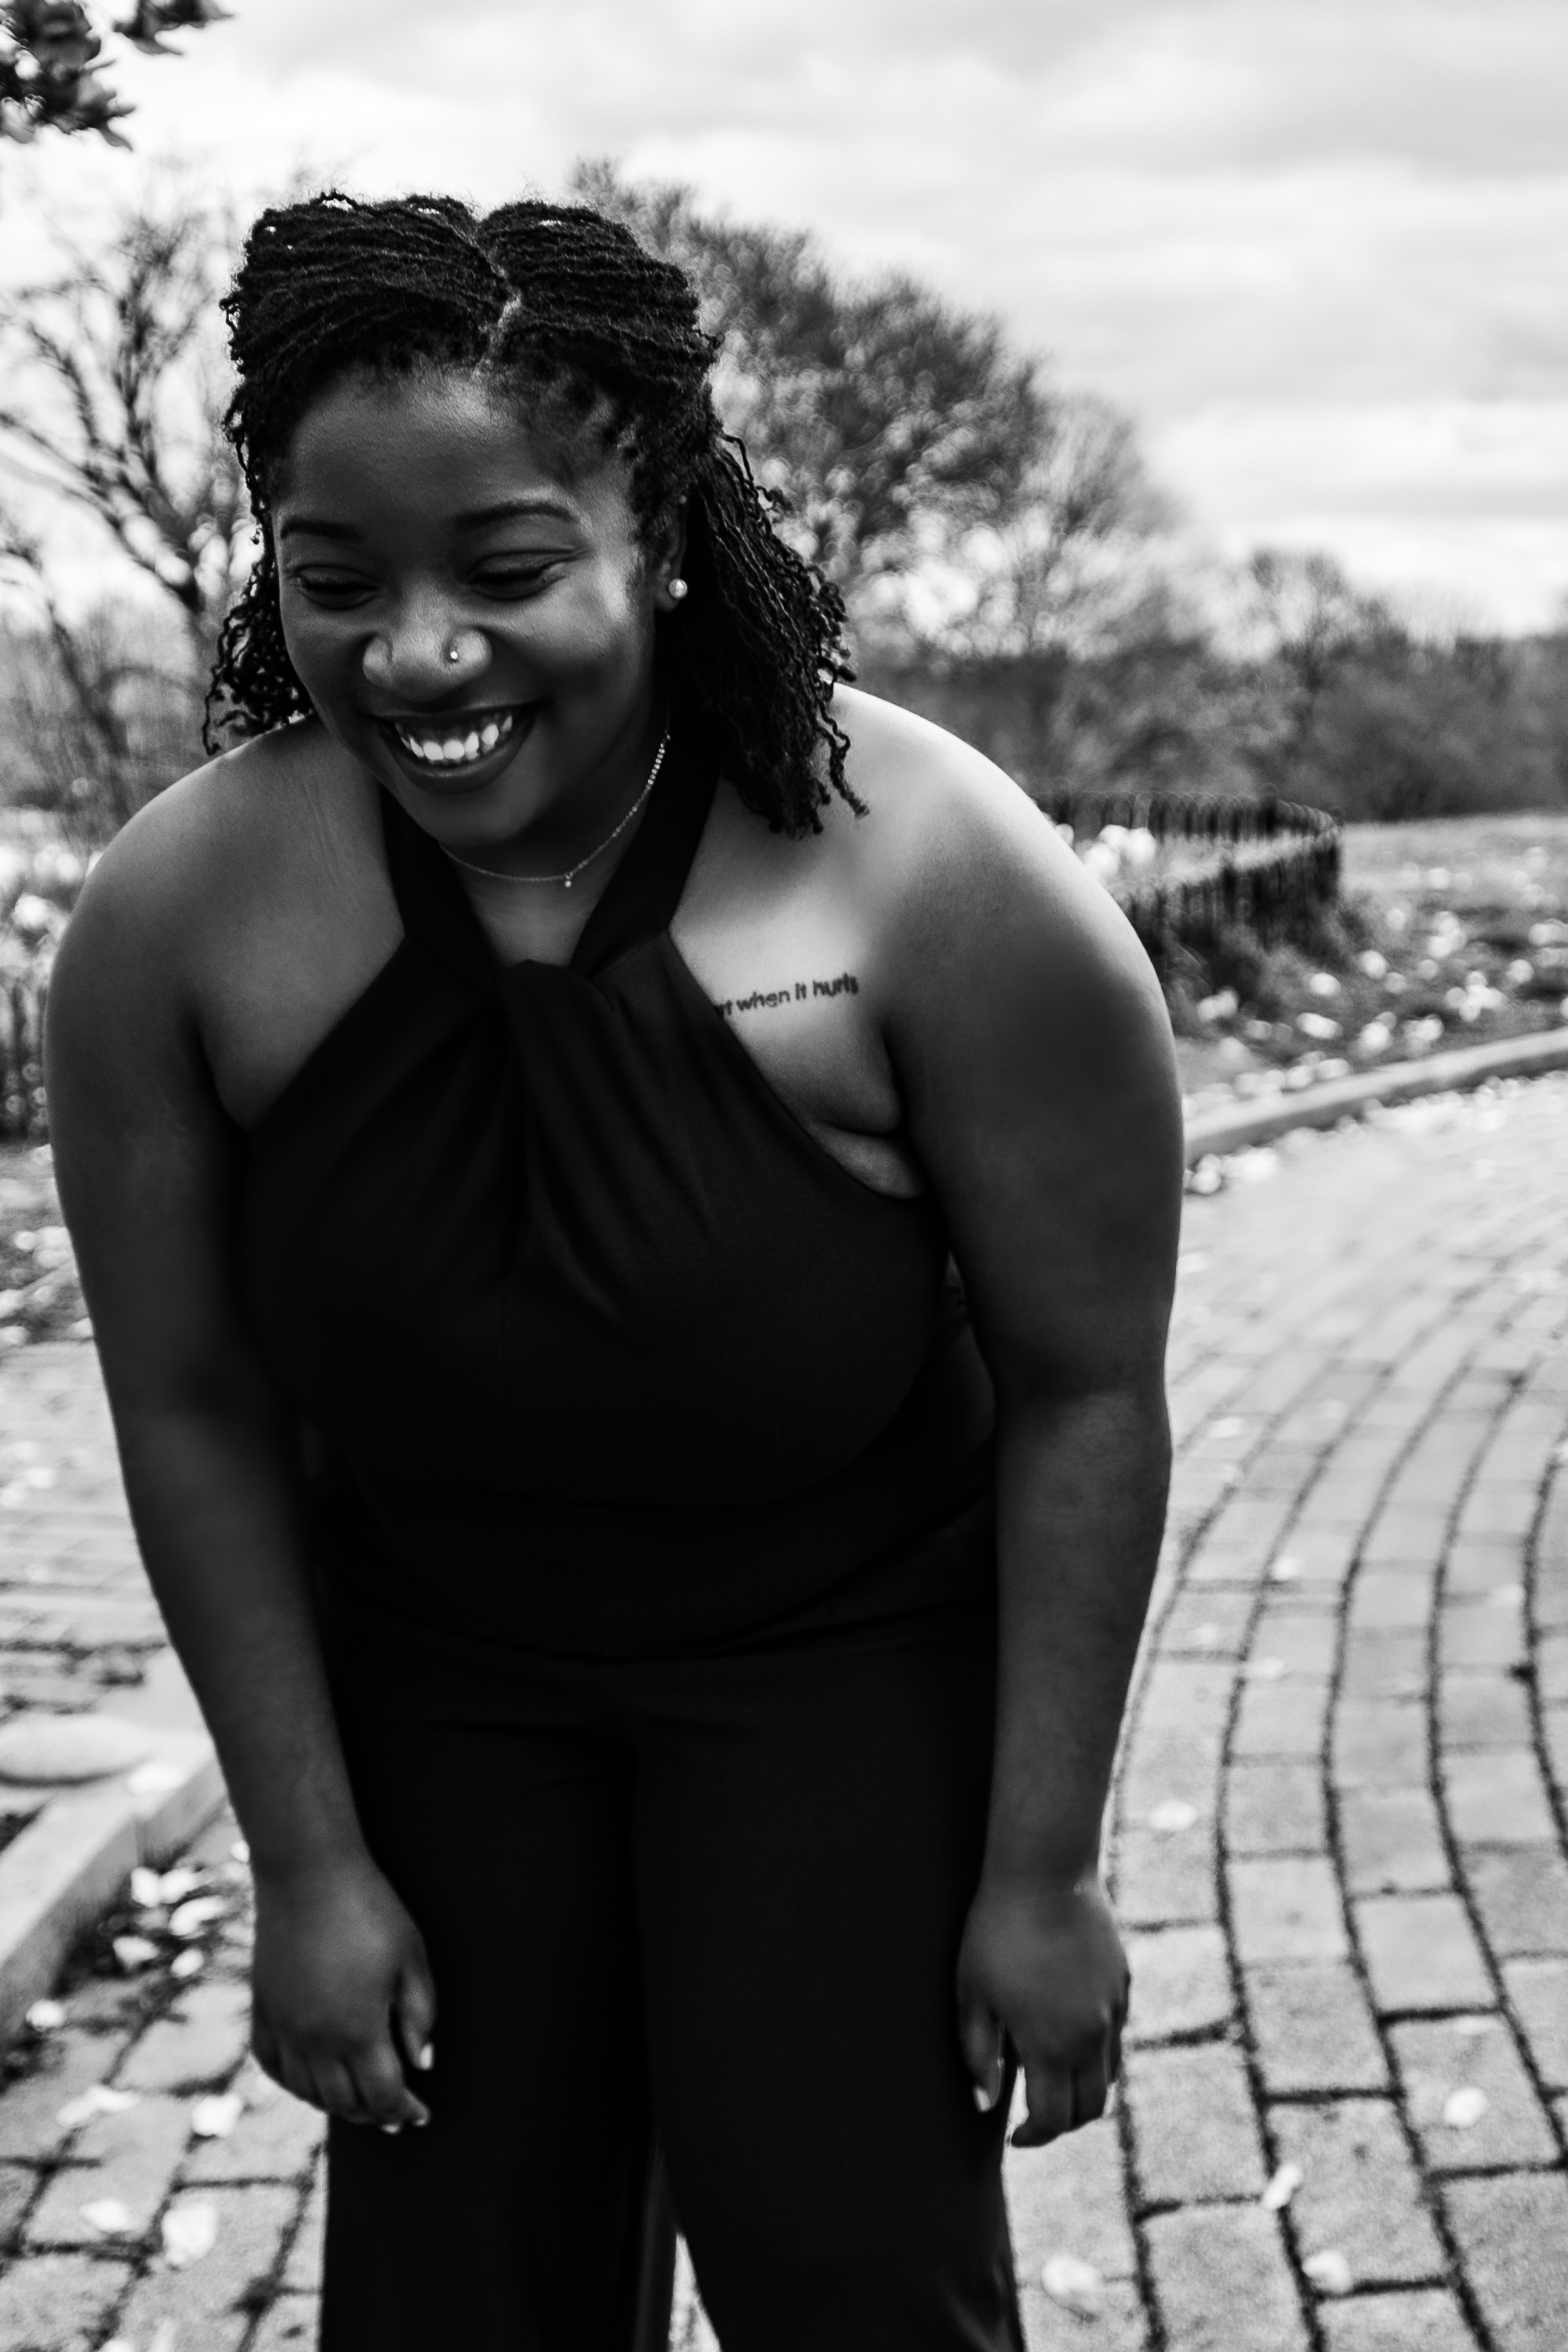 In this black and white portrait, Brendane Tynes is laughing, standing on a brick path.